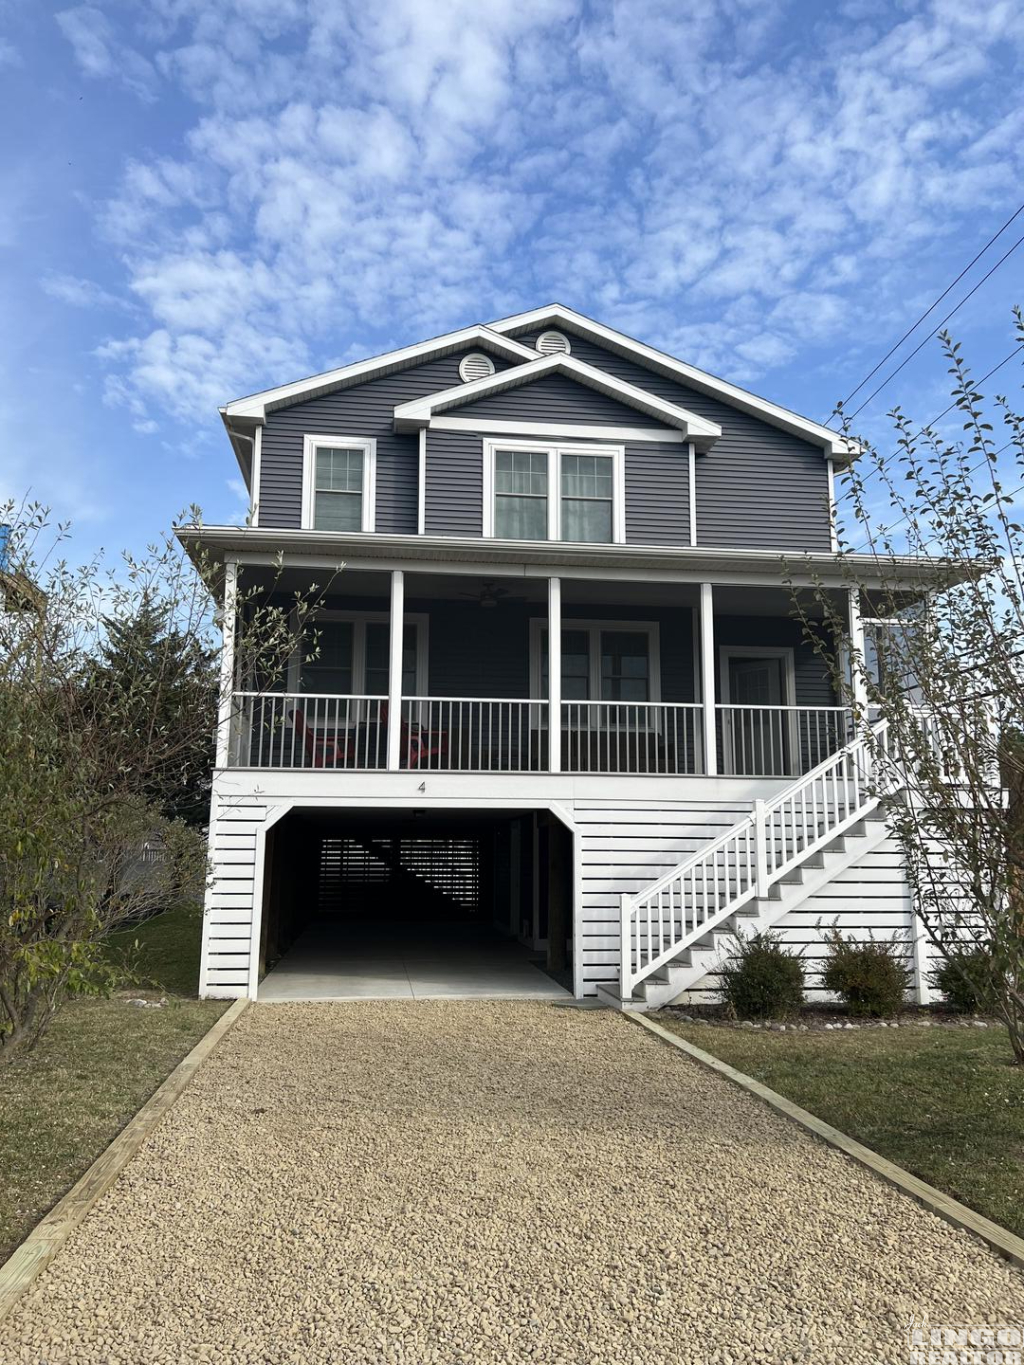 tennessee+2 Rehoboth Beach Real Estate, Lewes Beach Real Estate, Henlopen Acres Real Estate, Millsboro Real Estate and DE Beach Rentals - Jack Lingo REALTOR